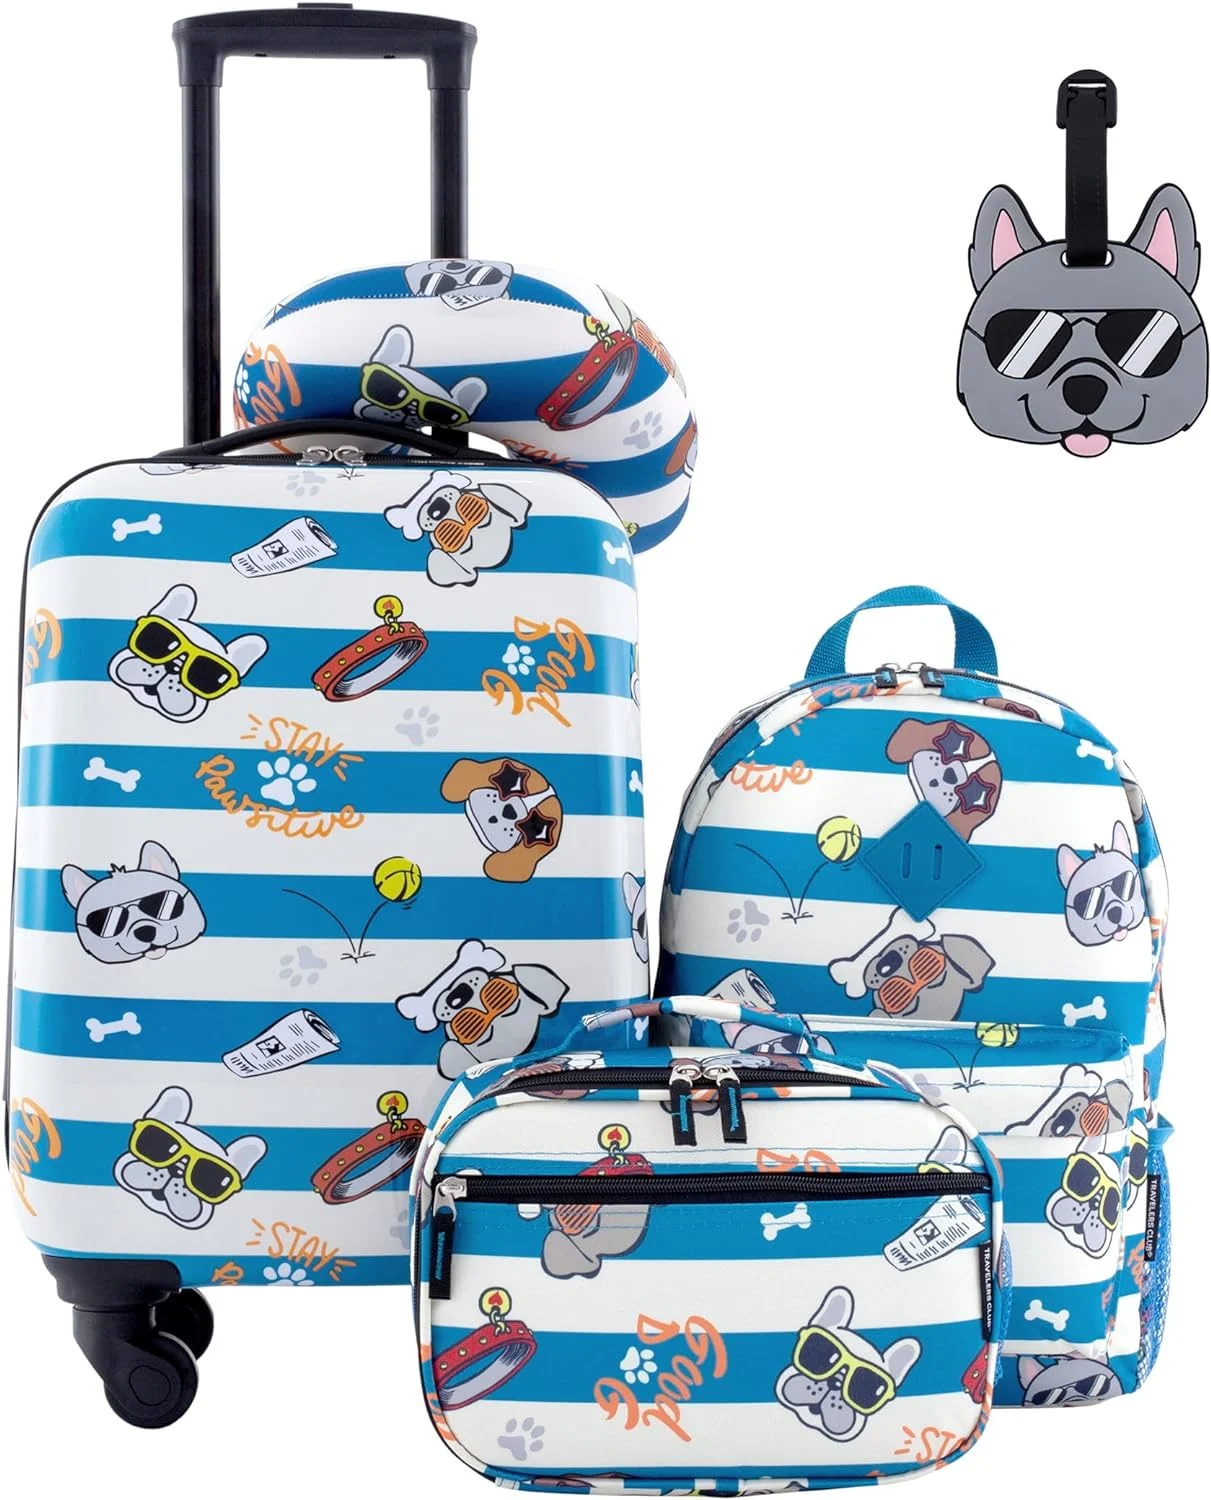 4 Best Carry On Travel Bags for Kids - Nomad Veronica